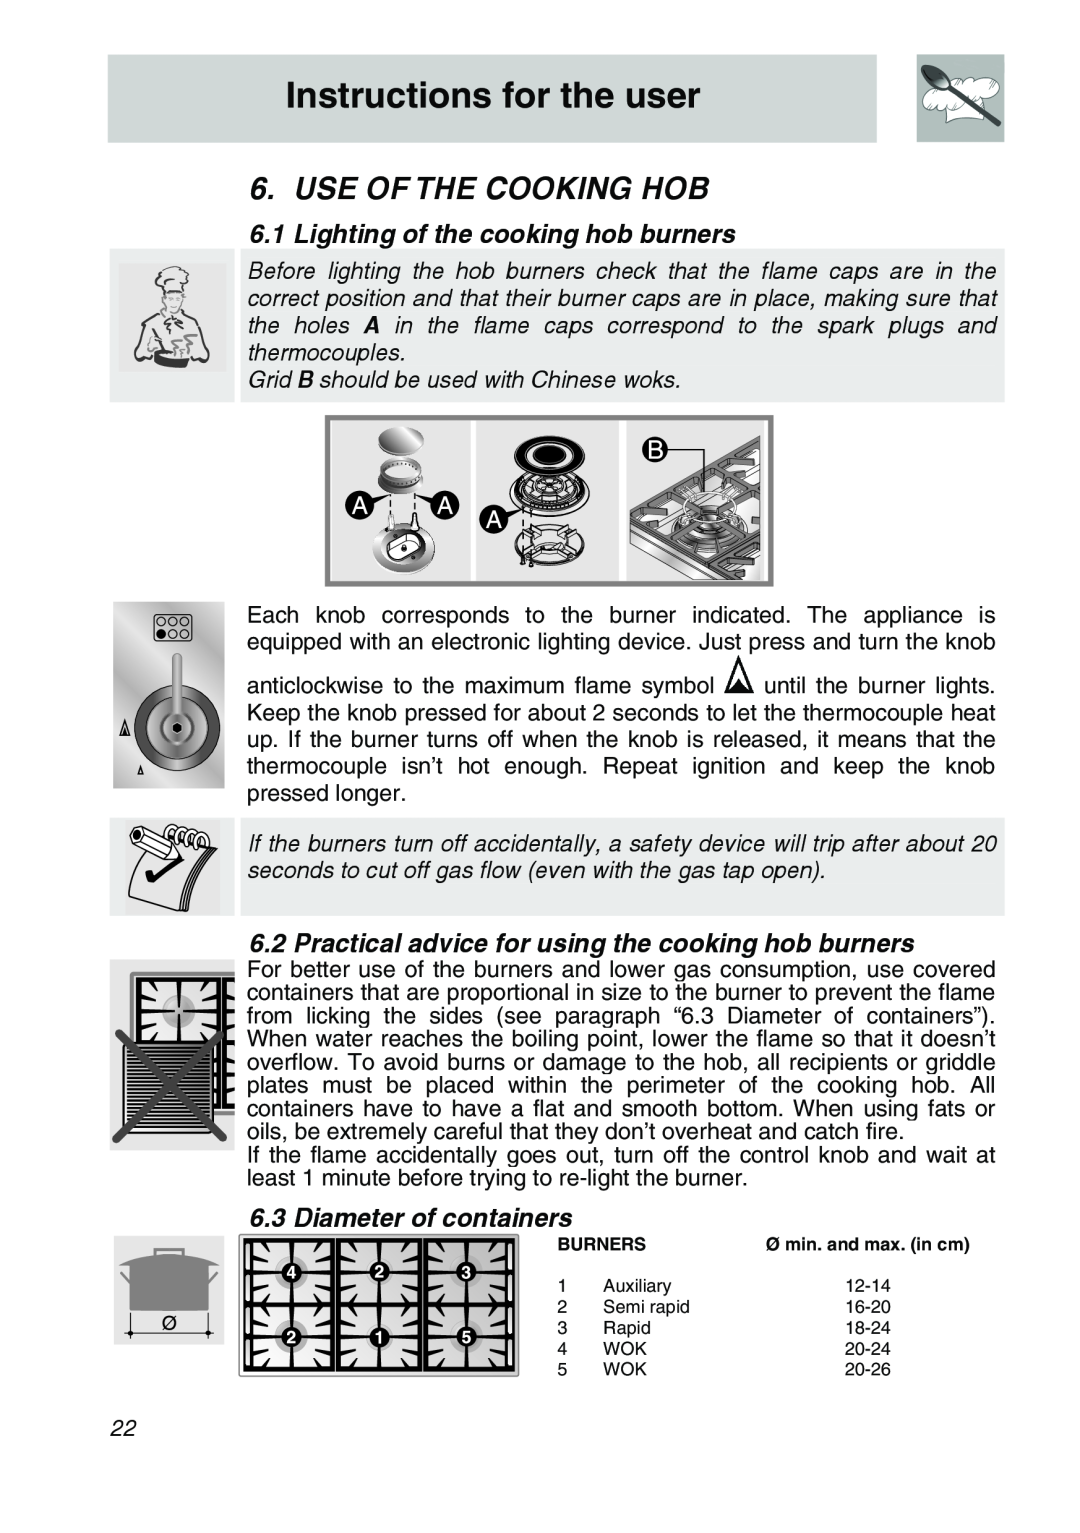 Smeg A21X-5 Use Of The Cooking Hob, Lighting of the cooking hob burners, Diameter of containers, Instructions for the user 